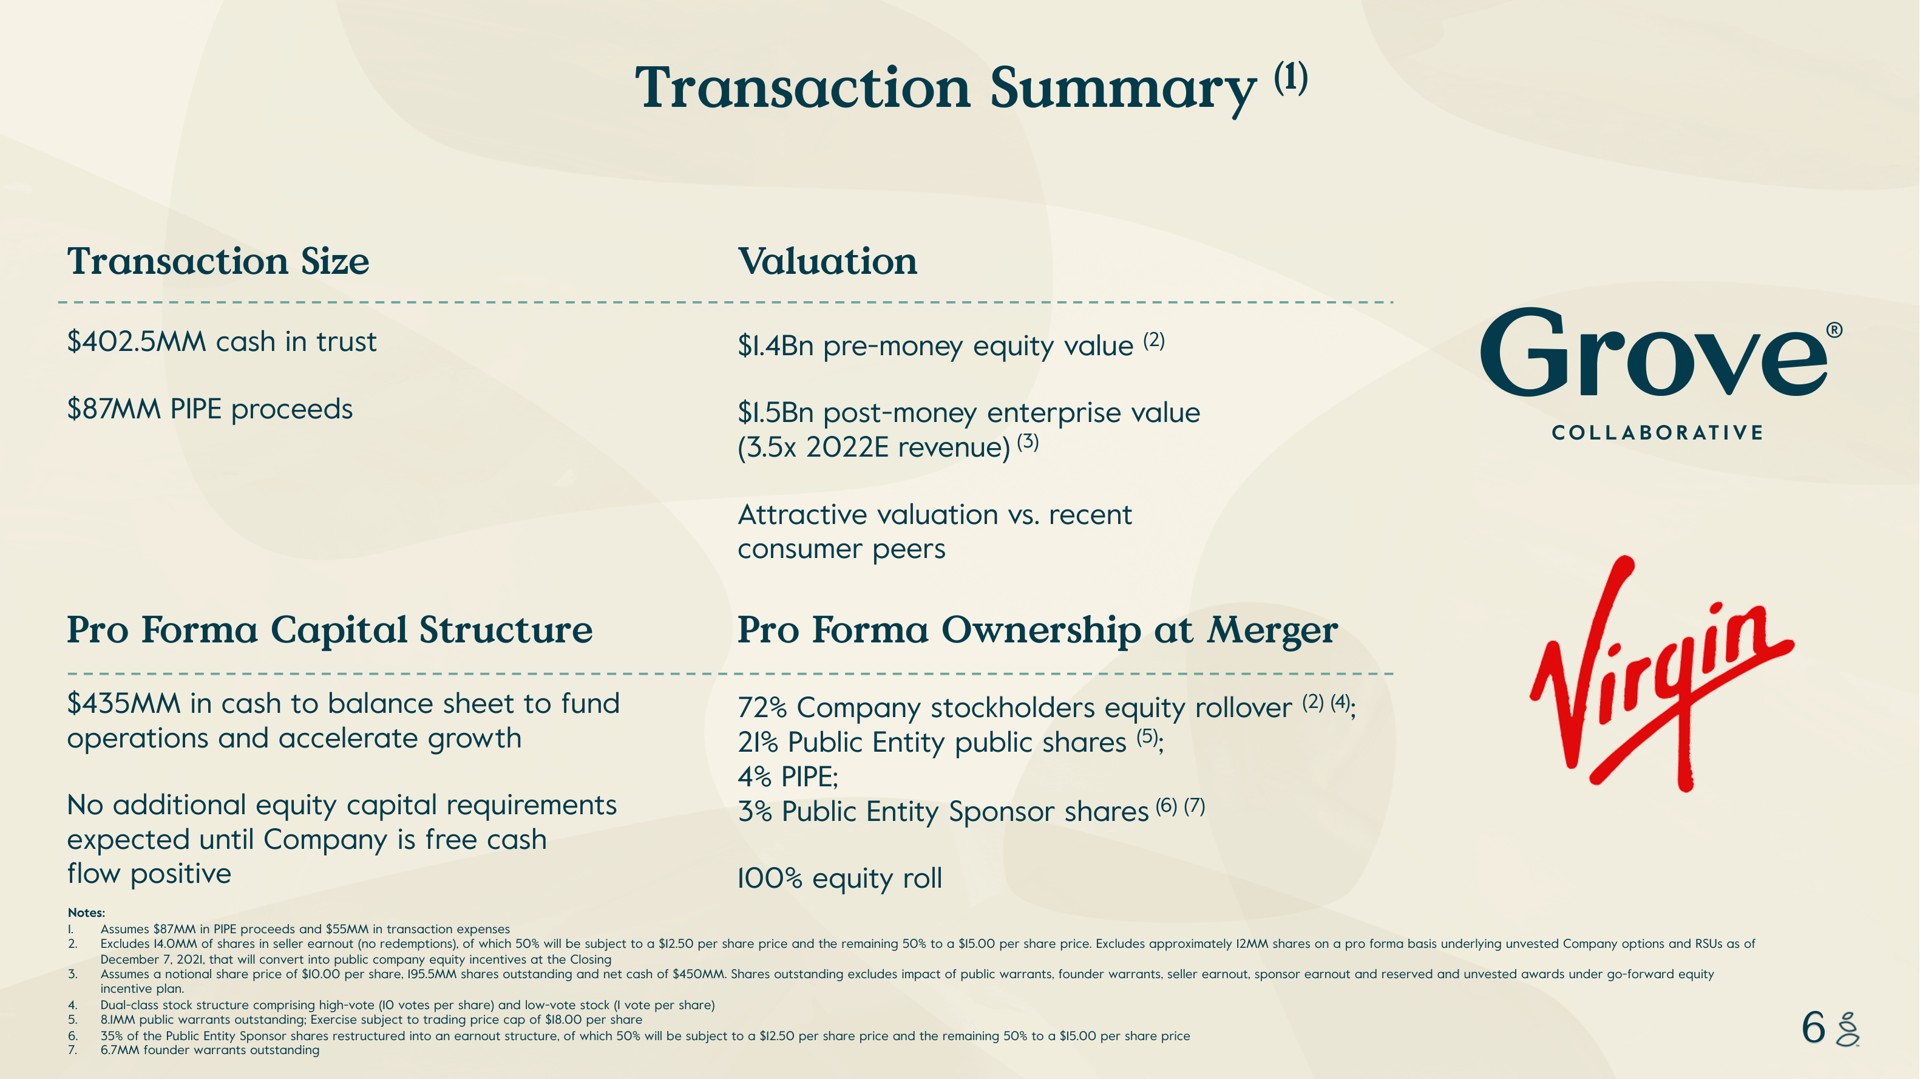 transaction summary transaction size valuation pro capital structure pro ownership at merger cash in trust pipe proceeds money equity value post money enterprise value revenue attractive recent consumer peers in cash to balance sheet to fund operations and accelerate growth no additional equity requirements expected until company is free cash flow positive company stockholders equity public entity public shares pipe public entity sponsor shares equity roll rove collaborative notes i assumes in pipe proceeds and in expenses excludes of shares in seller no redemptions of which will be subject to a per share price and the remaining to a per share price excludes approximately i shares on a basis underlying unvested company options and as of that will convert into public company equity incentives the closing assumes a notional share price of per share i shares outstanding and net cash of shares outstanding excludes impact of public warrants founder warrants seller sponsor and reserved and unvested awards under go forward equity incentive plan dual class stock comprising high vote votes per share and low vote stock i vote per share public warrants outstanding exercise subject to trading price cap of per share of the public entity sponsor shares into an of which will be subject to a per share price and the remaining to a per share price founder warrants outstanding | Grove